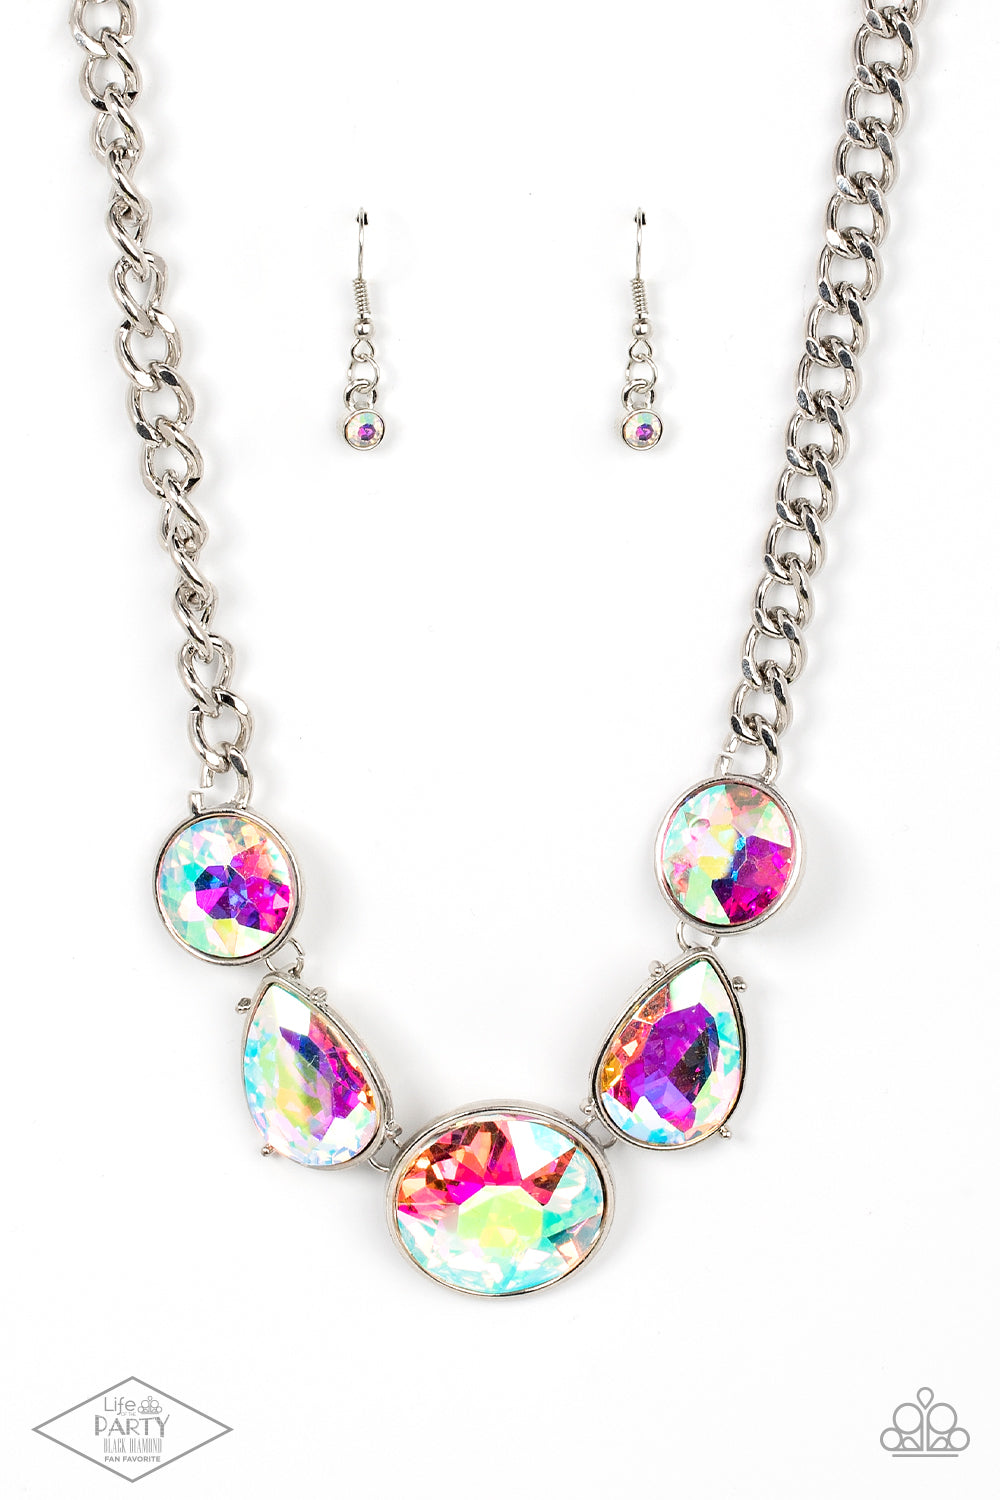 All The Worlds My Stage - Multi Color Iridescent - Silver Teardrop Necklace - Paparazzi Accessories - Infused with heavy silver chain, an exaggerated display of round and teardrop shaped iridescent rhinestones connects below the collar for a blinding look. Features an adjustable clasp closure.